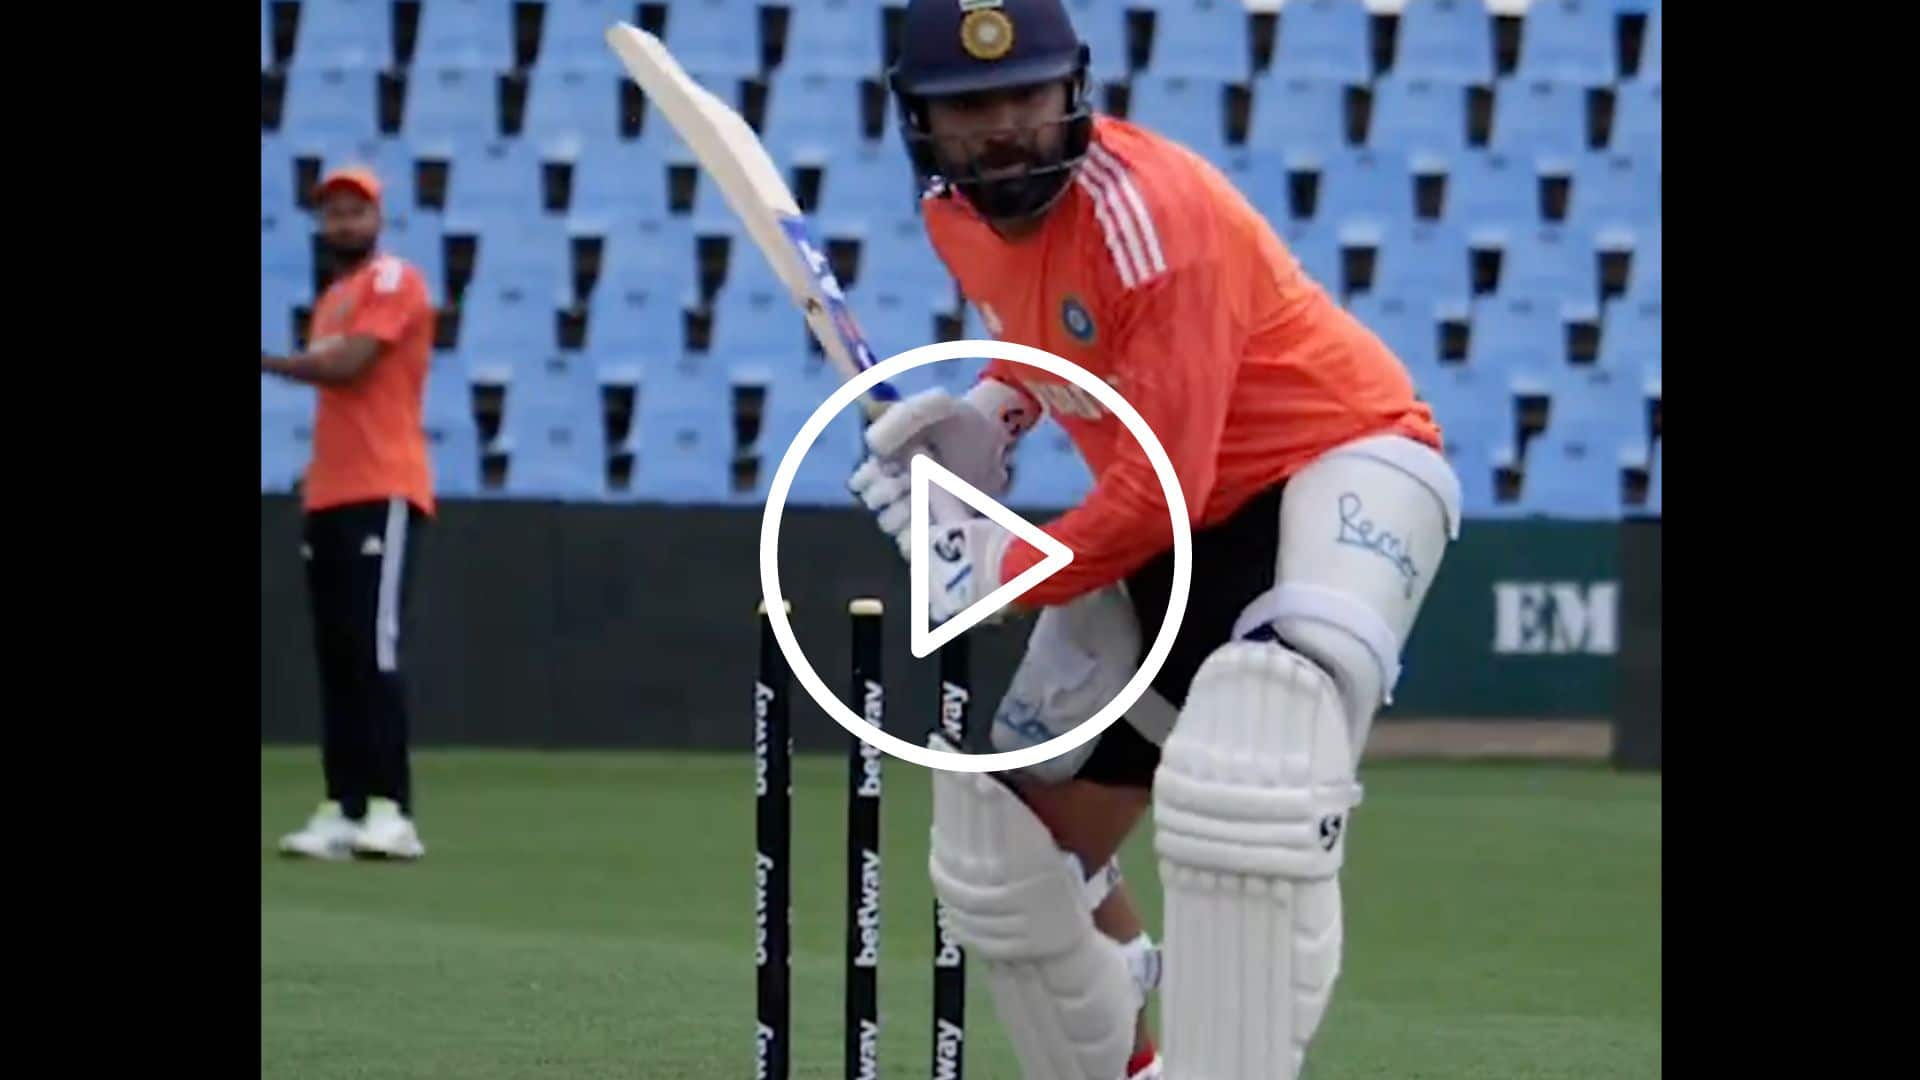 [Watch] Rohit Sharma's Intense Practice Session Ahead Of Boxing Day Test Match vs SA